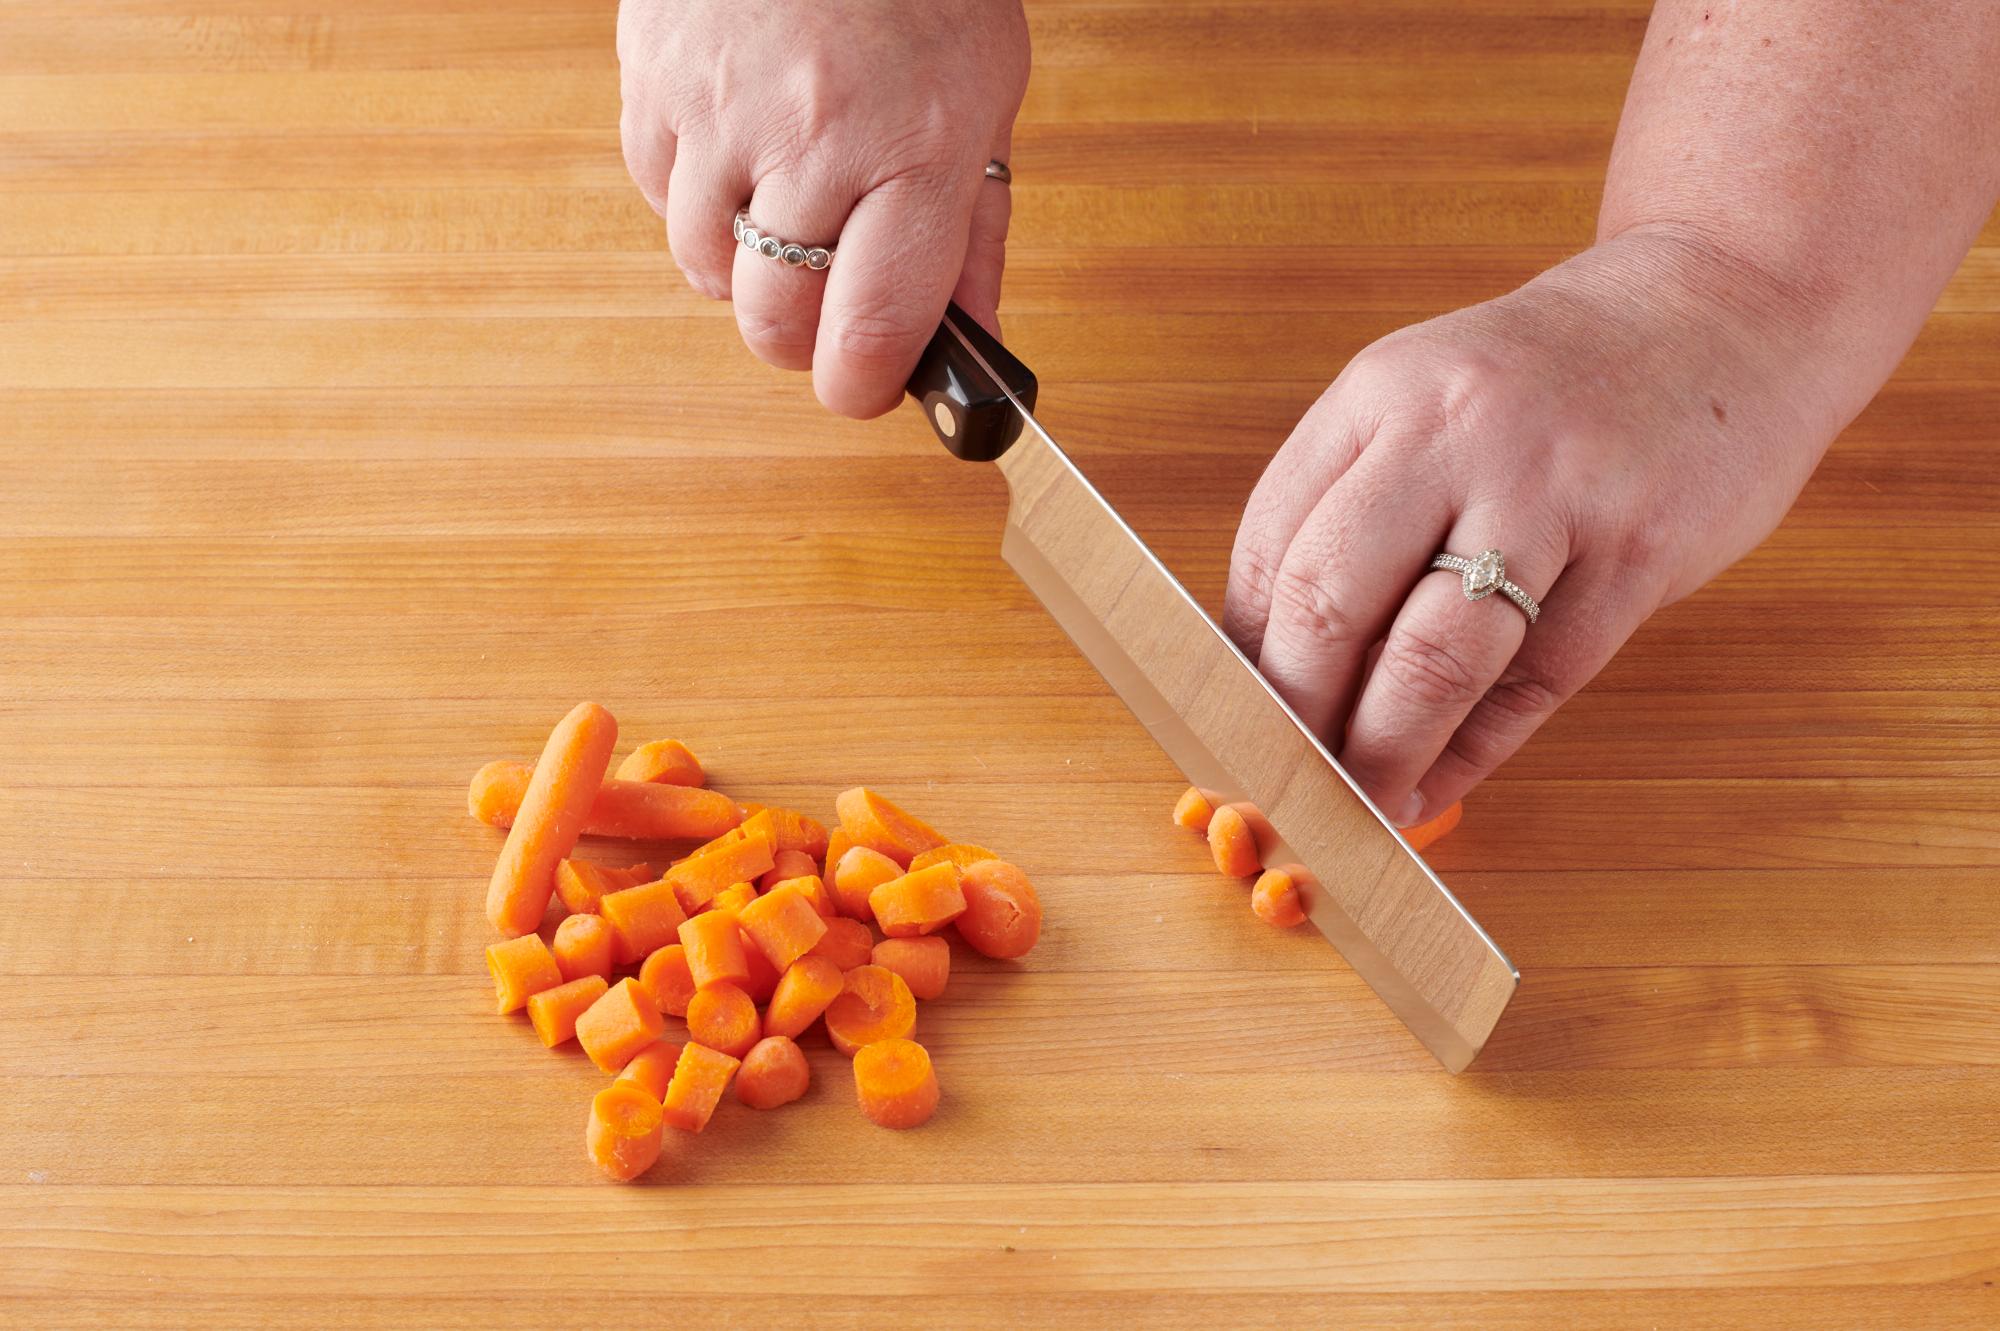 Cut the baby carrots into bite-sized pieces with a 6 inch Vegetable knife.